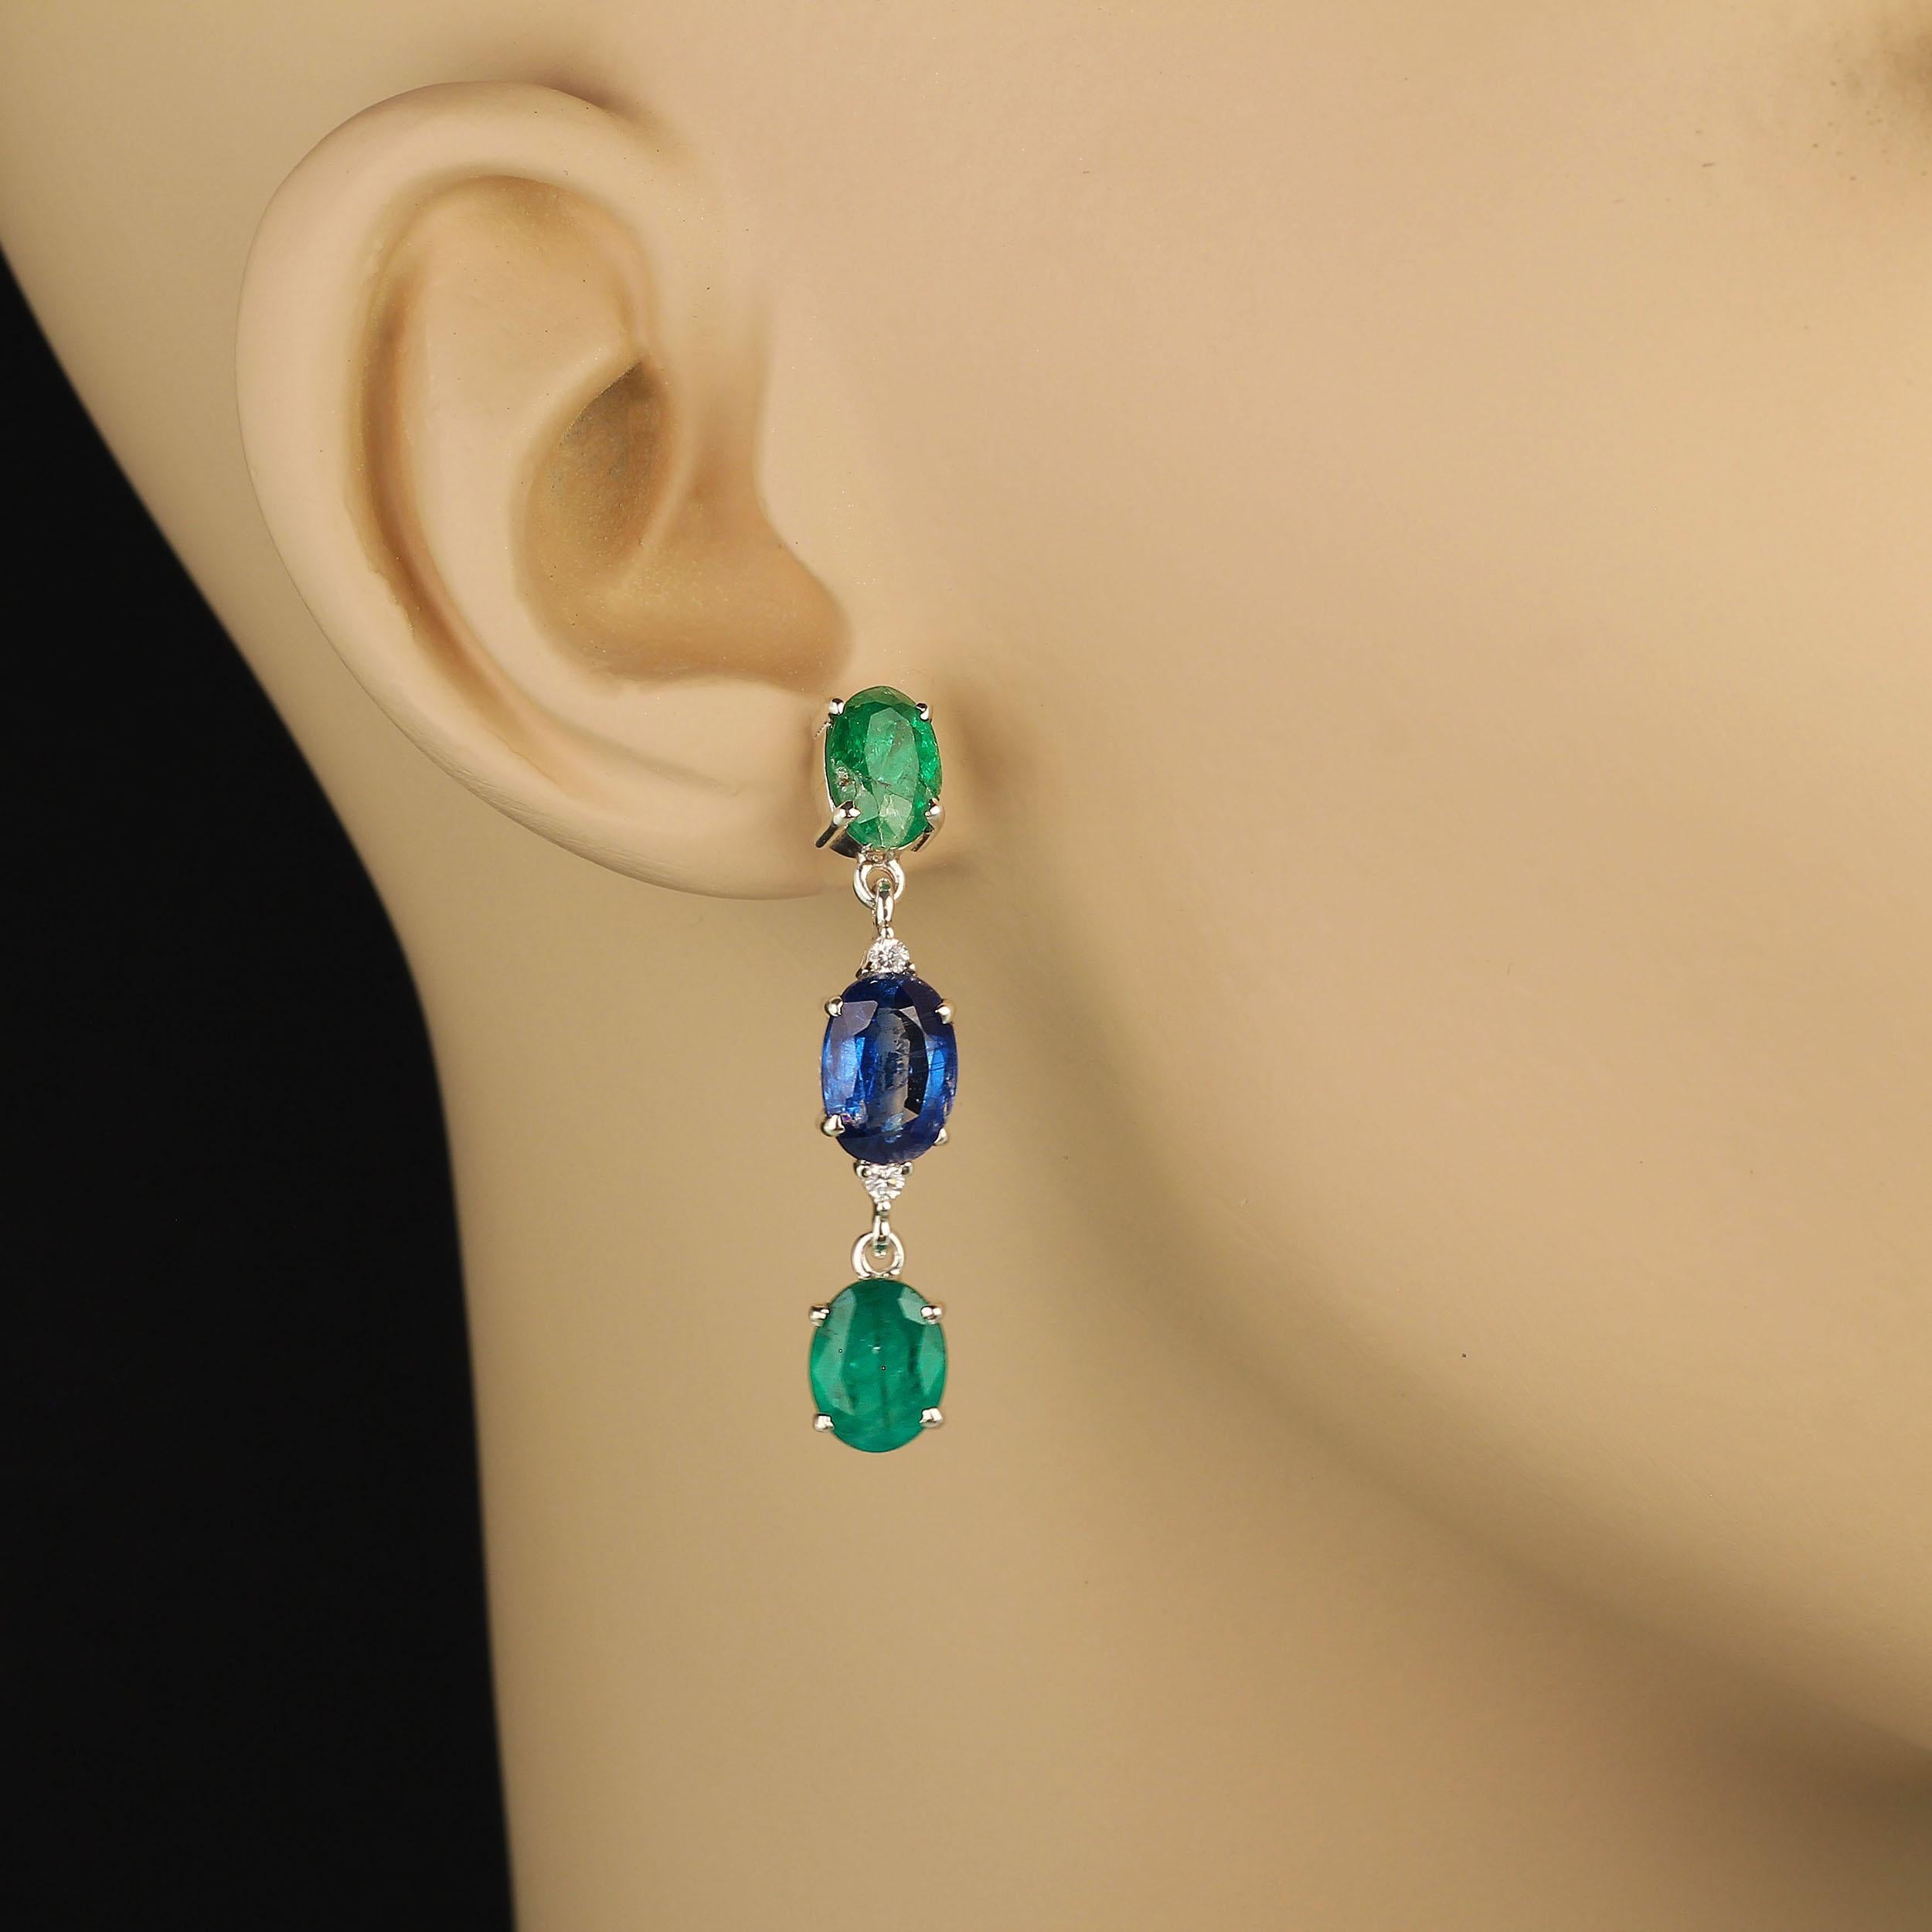 Scintillating, swinging Emerald and Kyanite earrings. These are two inches of life and beauty hanging from your ears.  Fabulous color in these oval gemstones that will jump off your ears. There are 7.15 ctw of Emeralds and 5.48 ctw of Kyanites in